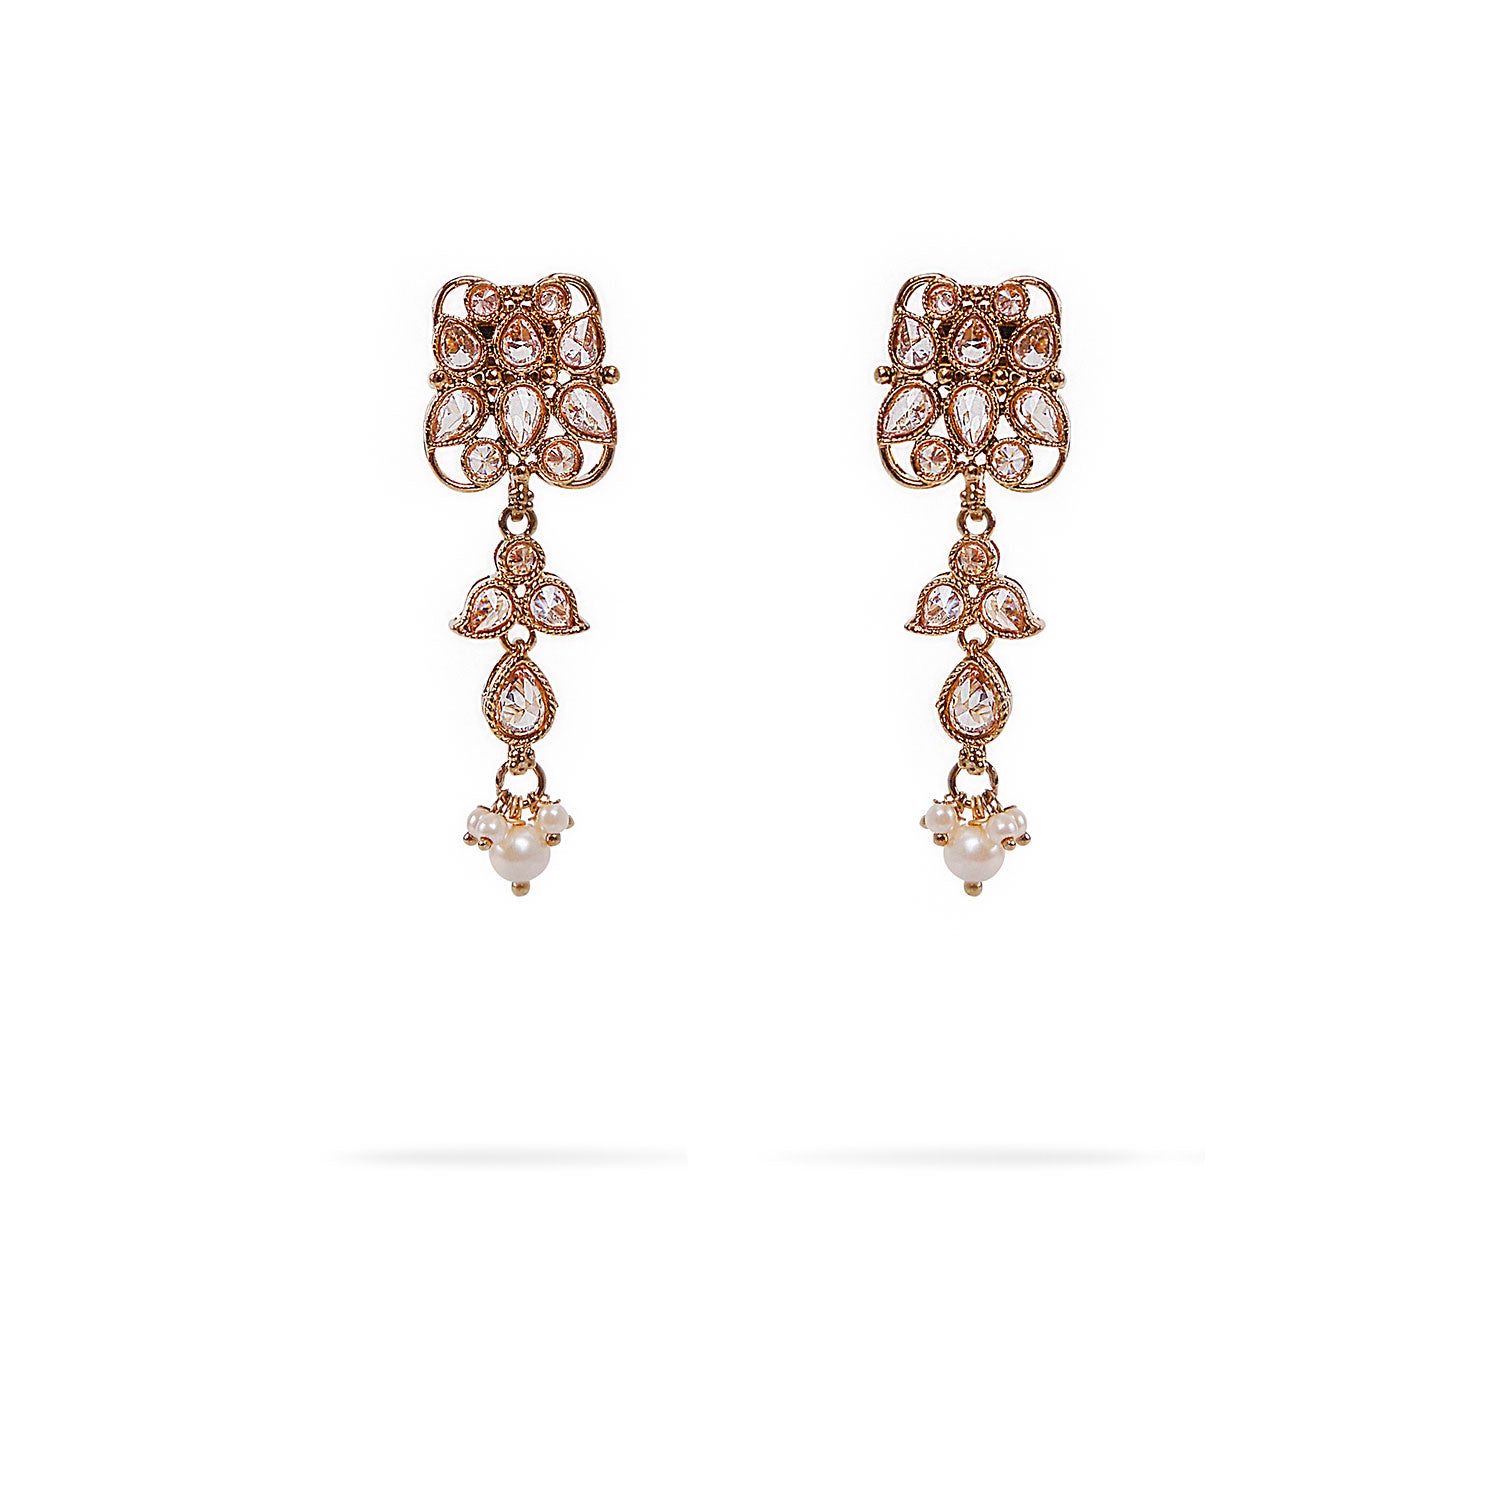 Siena Earrings in Pearl and Antique Gold